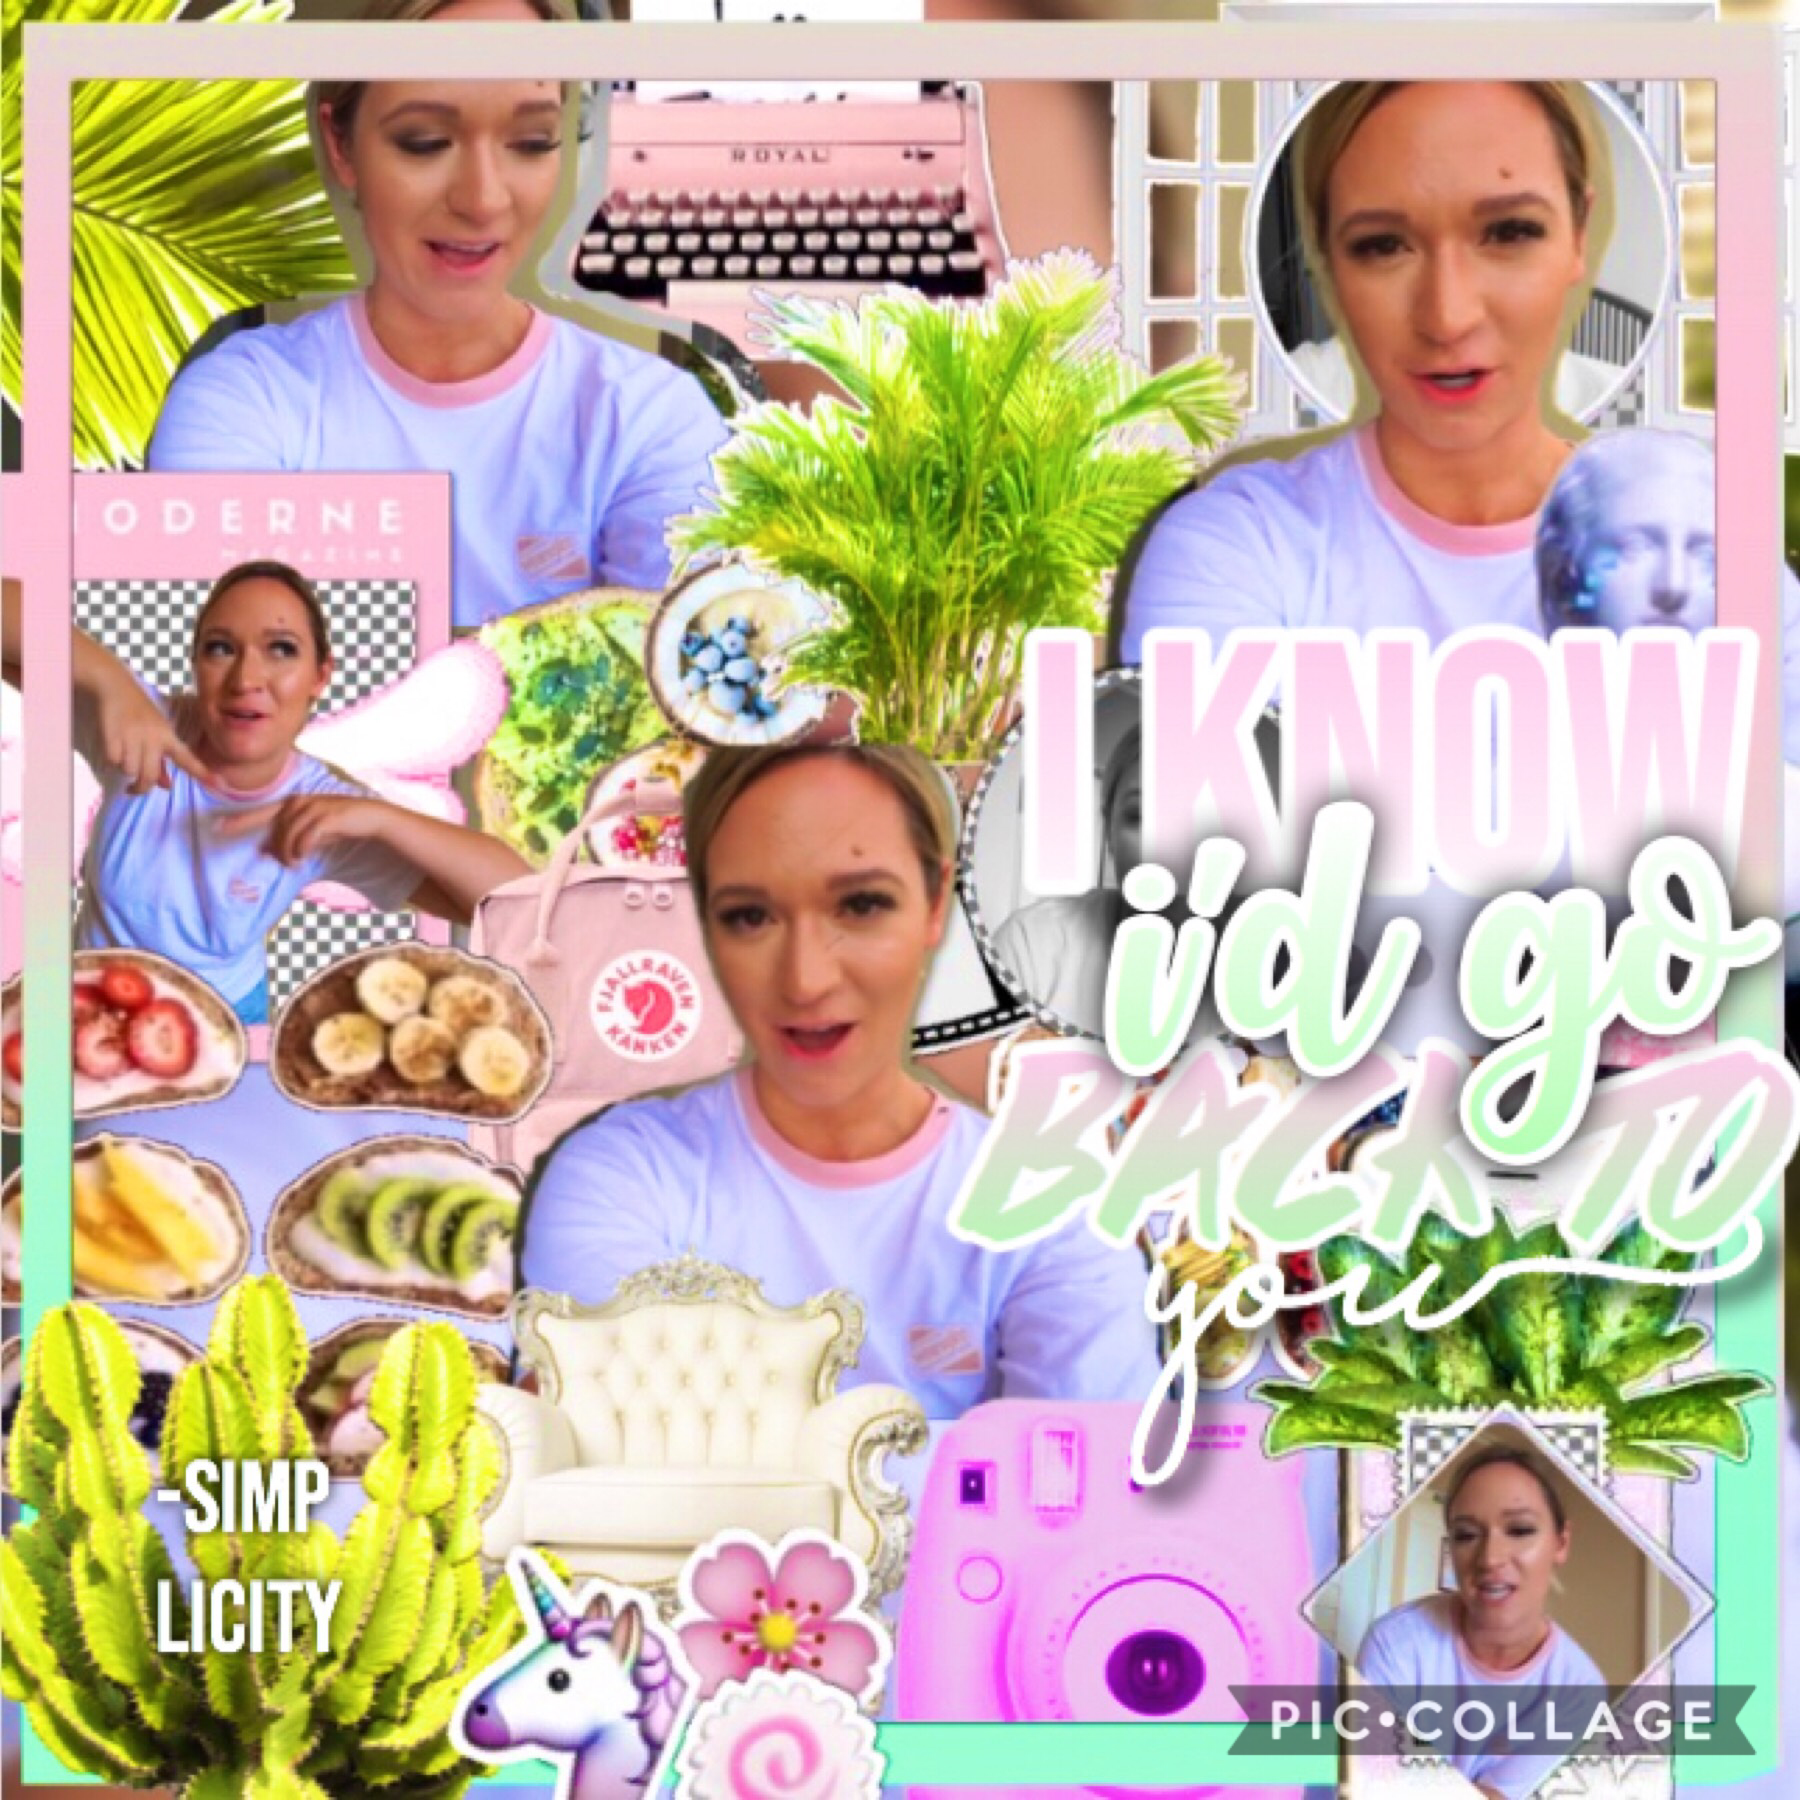 TAP
Yeah I know this is really bad but I decided to try out a border. I mean I like the effect it gives to the edit but the edit to begin with is just ugly🤣
QOTD: Nutella or peanut butter
AOTD: nutella😋